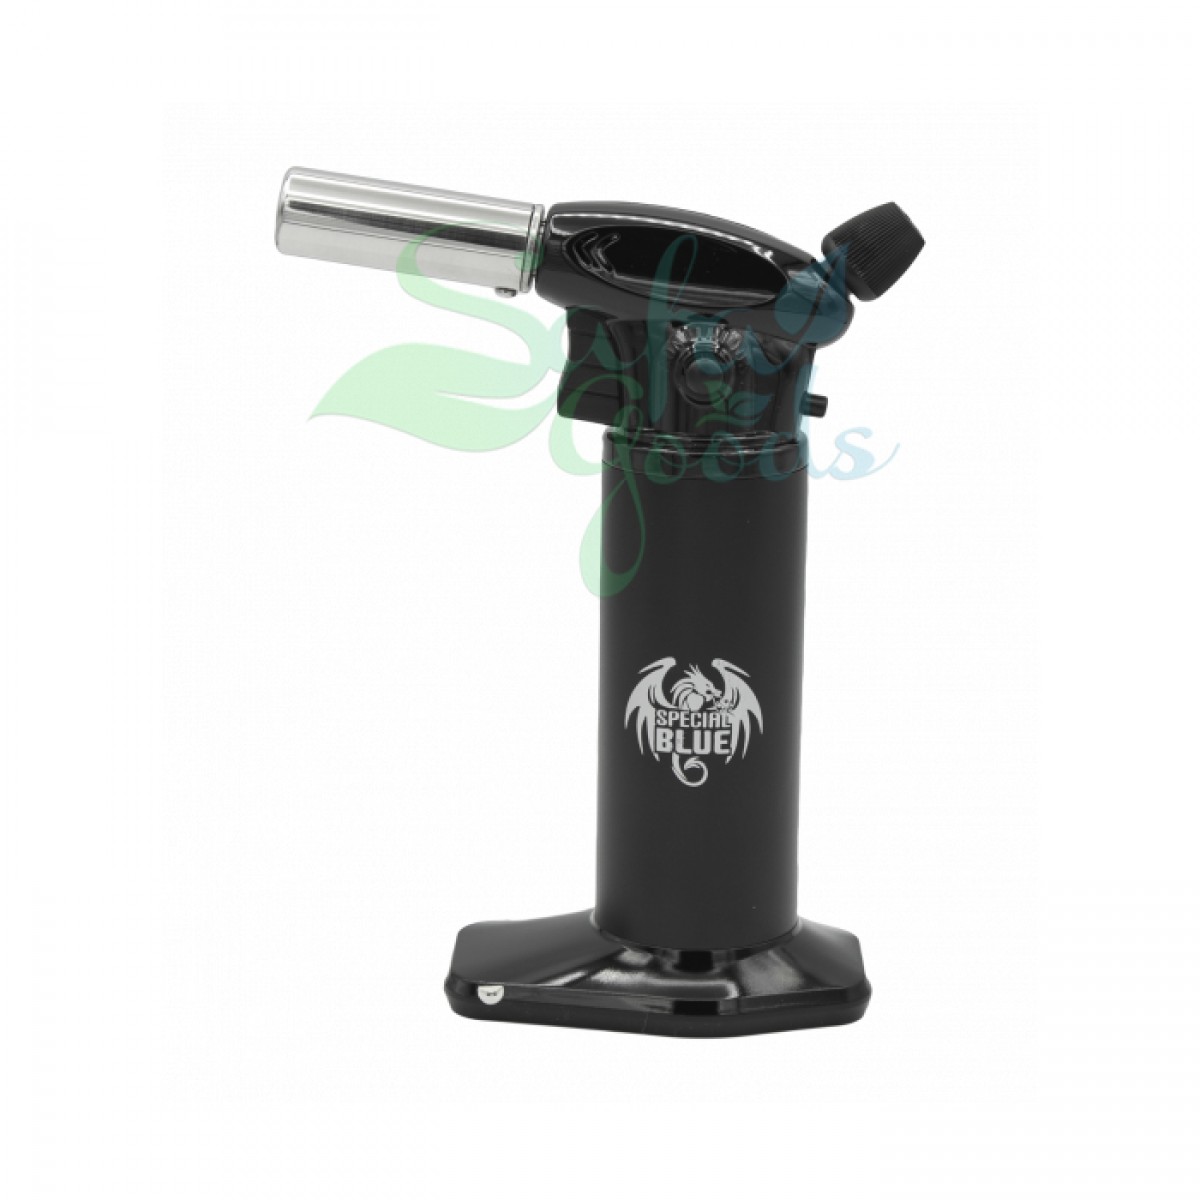 Special Blue - Toro Torch